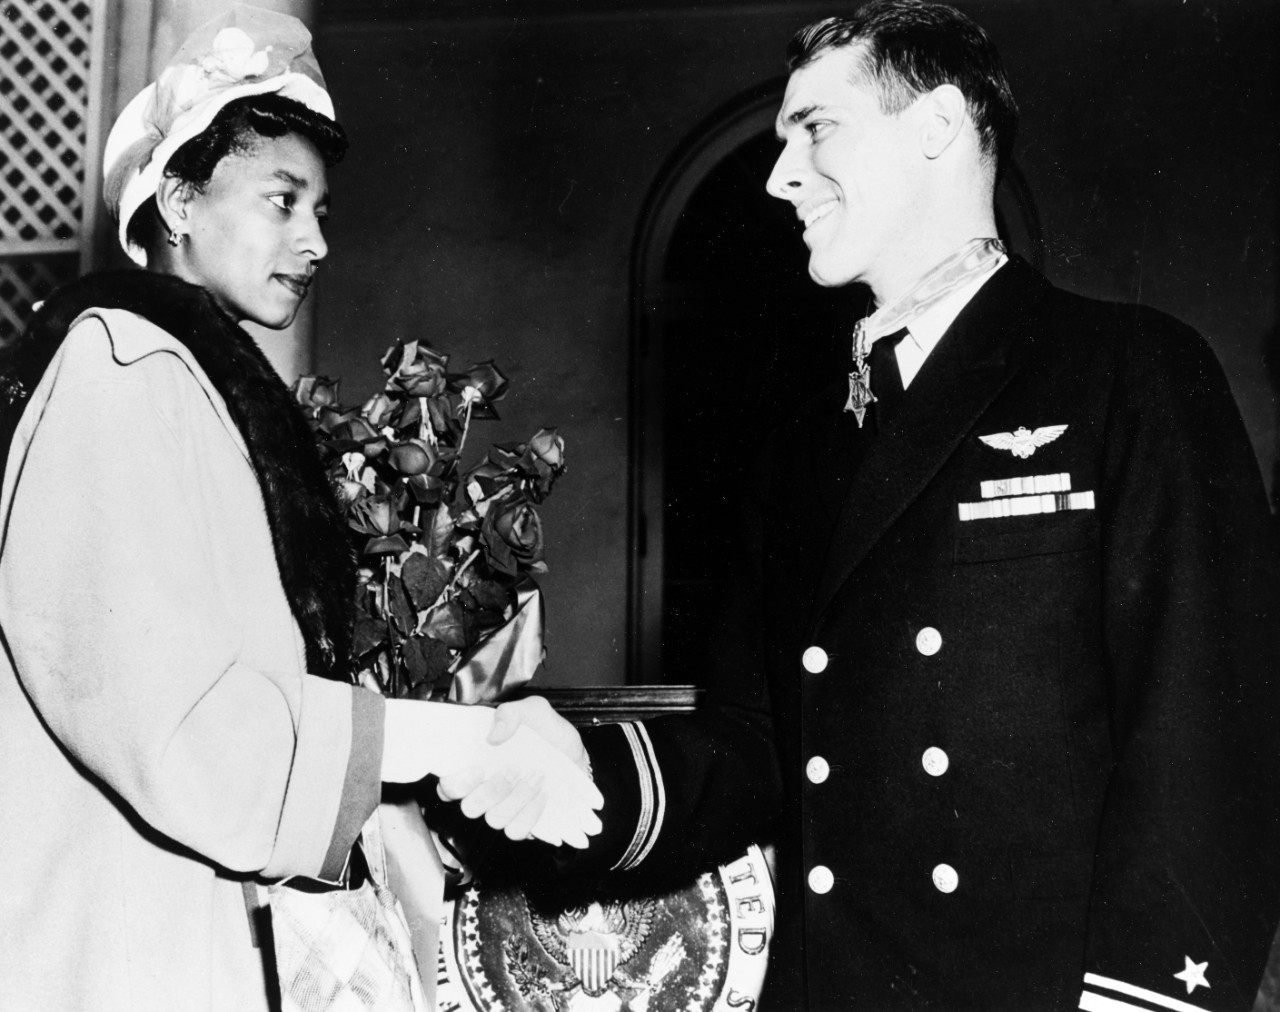 Hudner shaking hands with Ensign Brown's widow